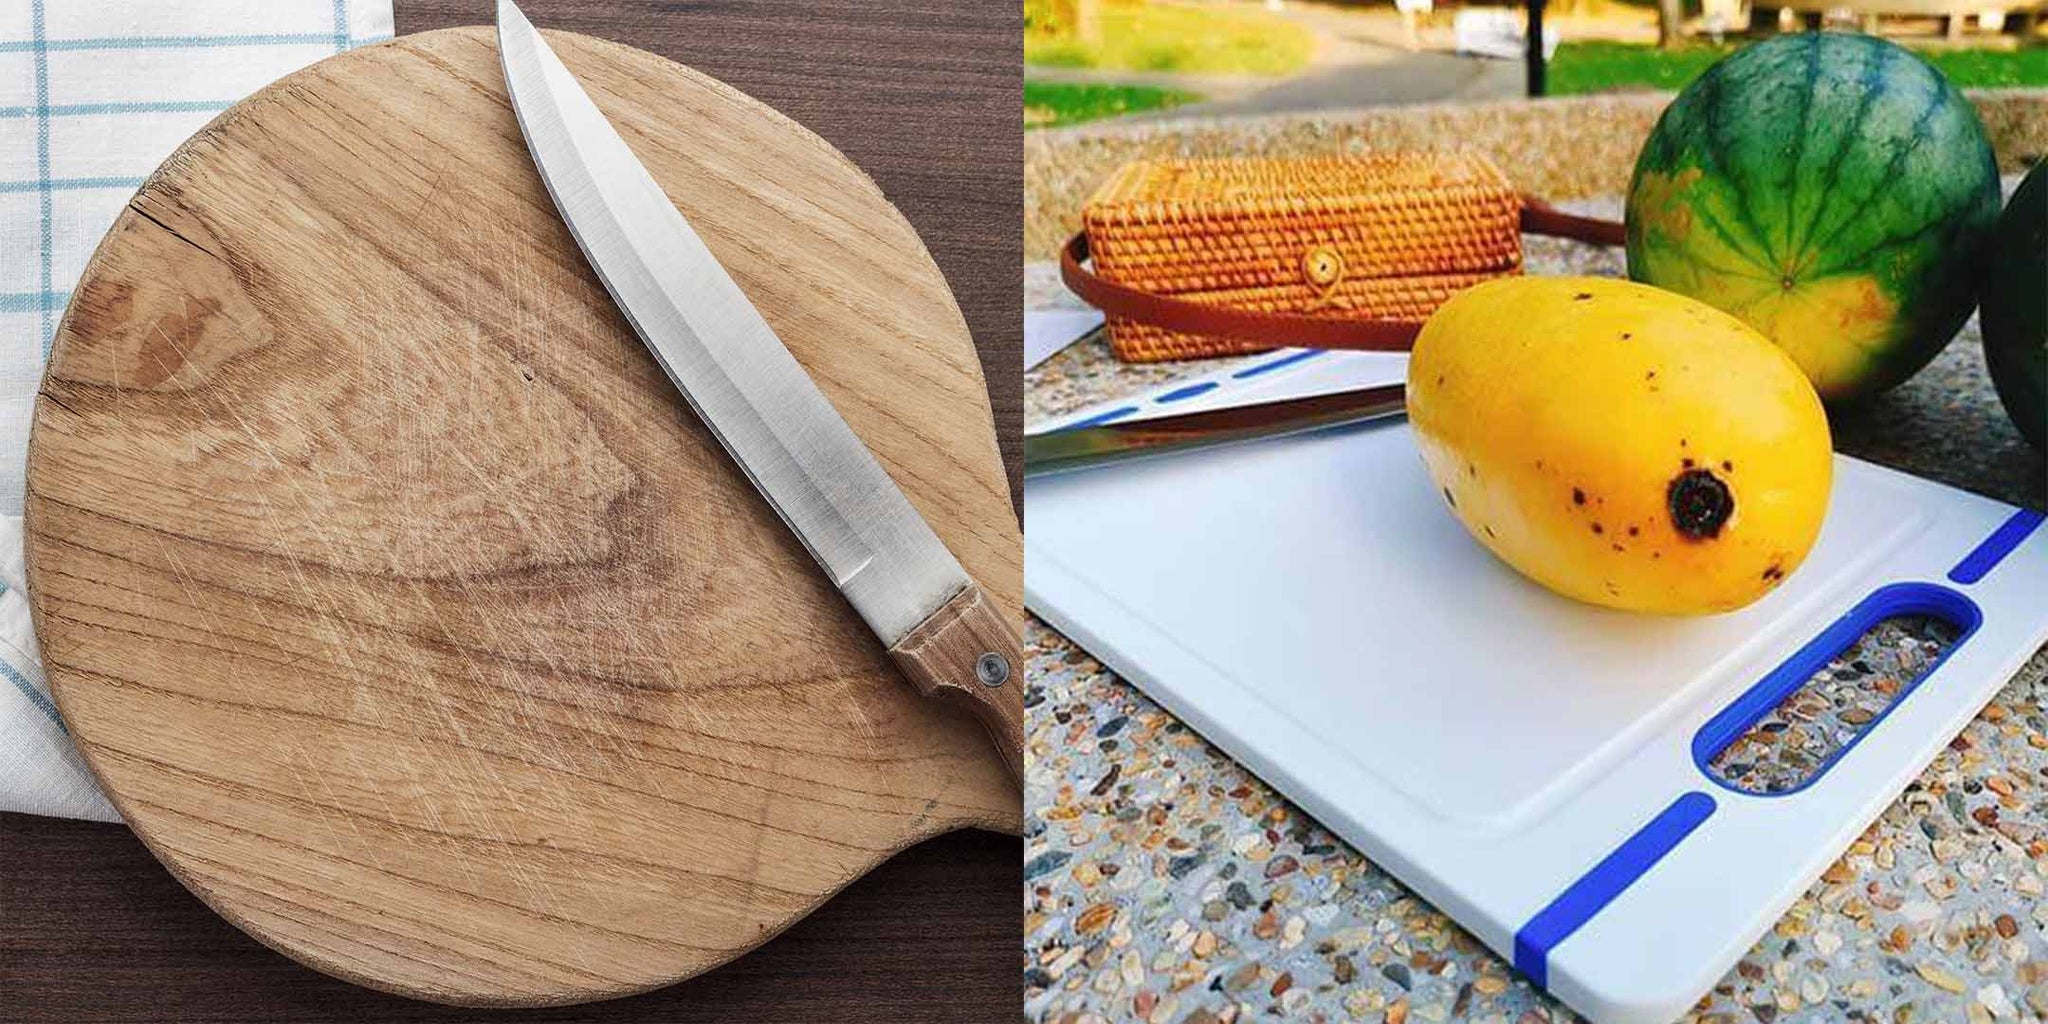 Kitchen Knives and Cutting Board